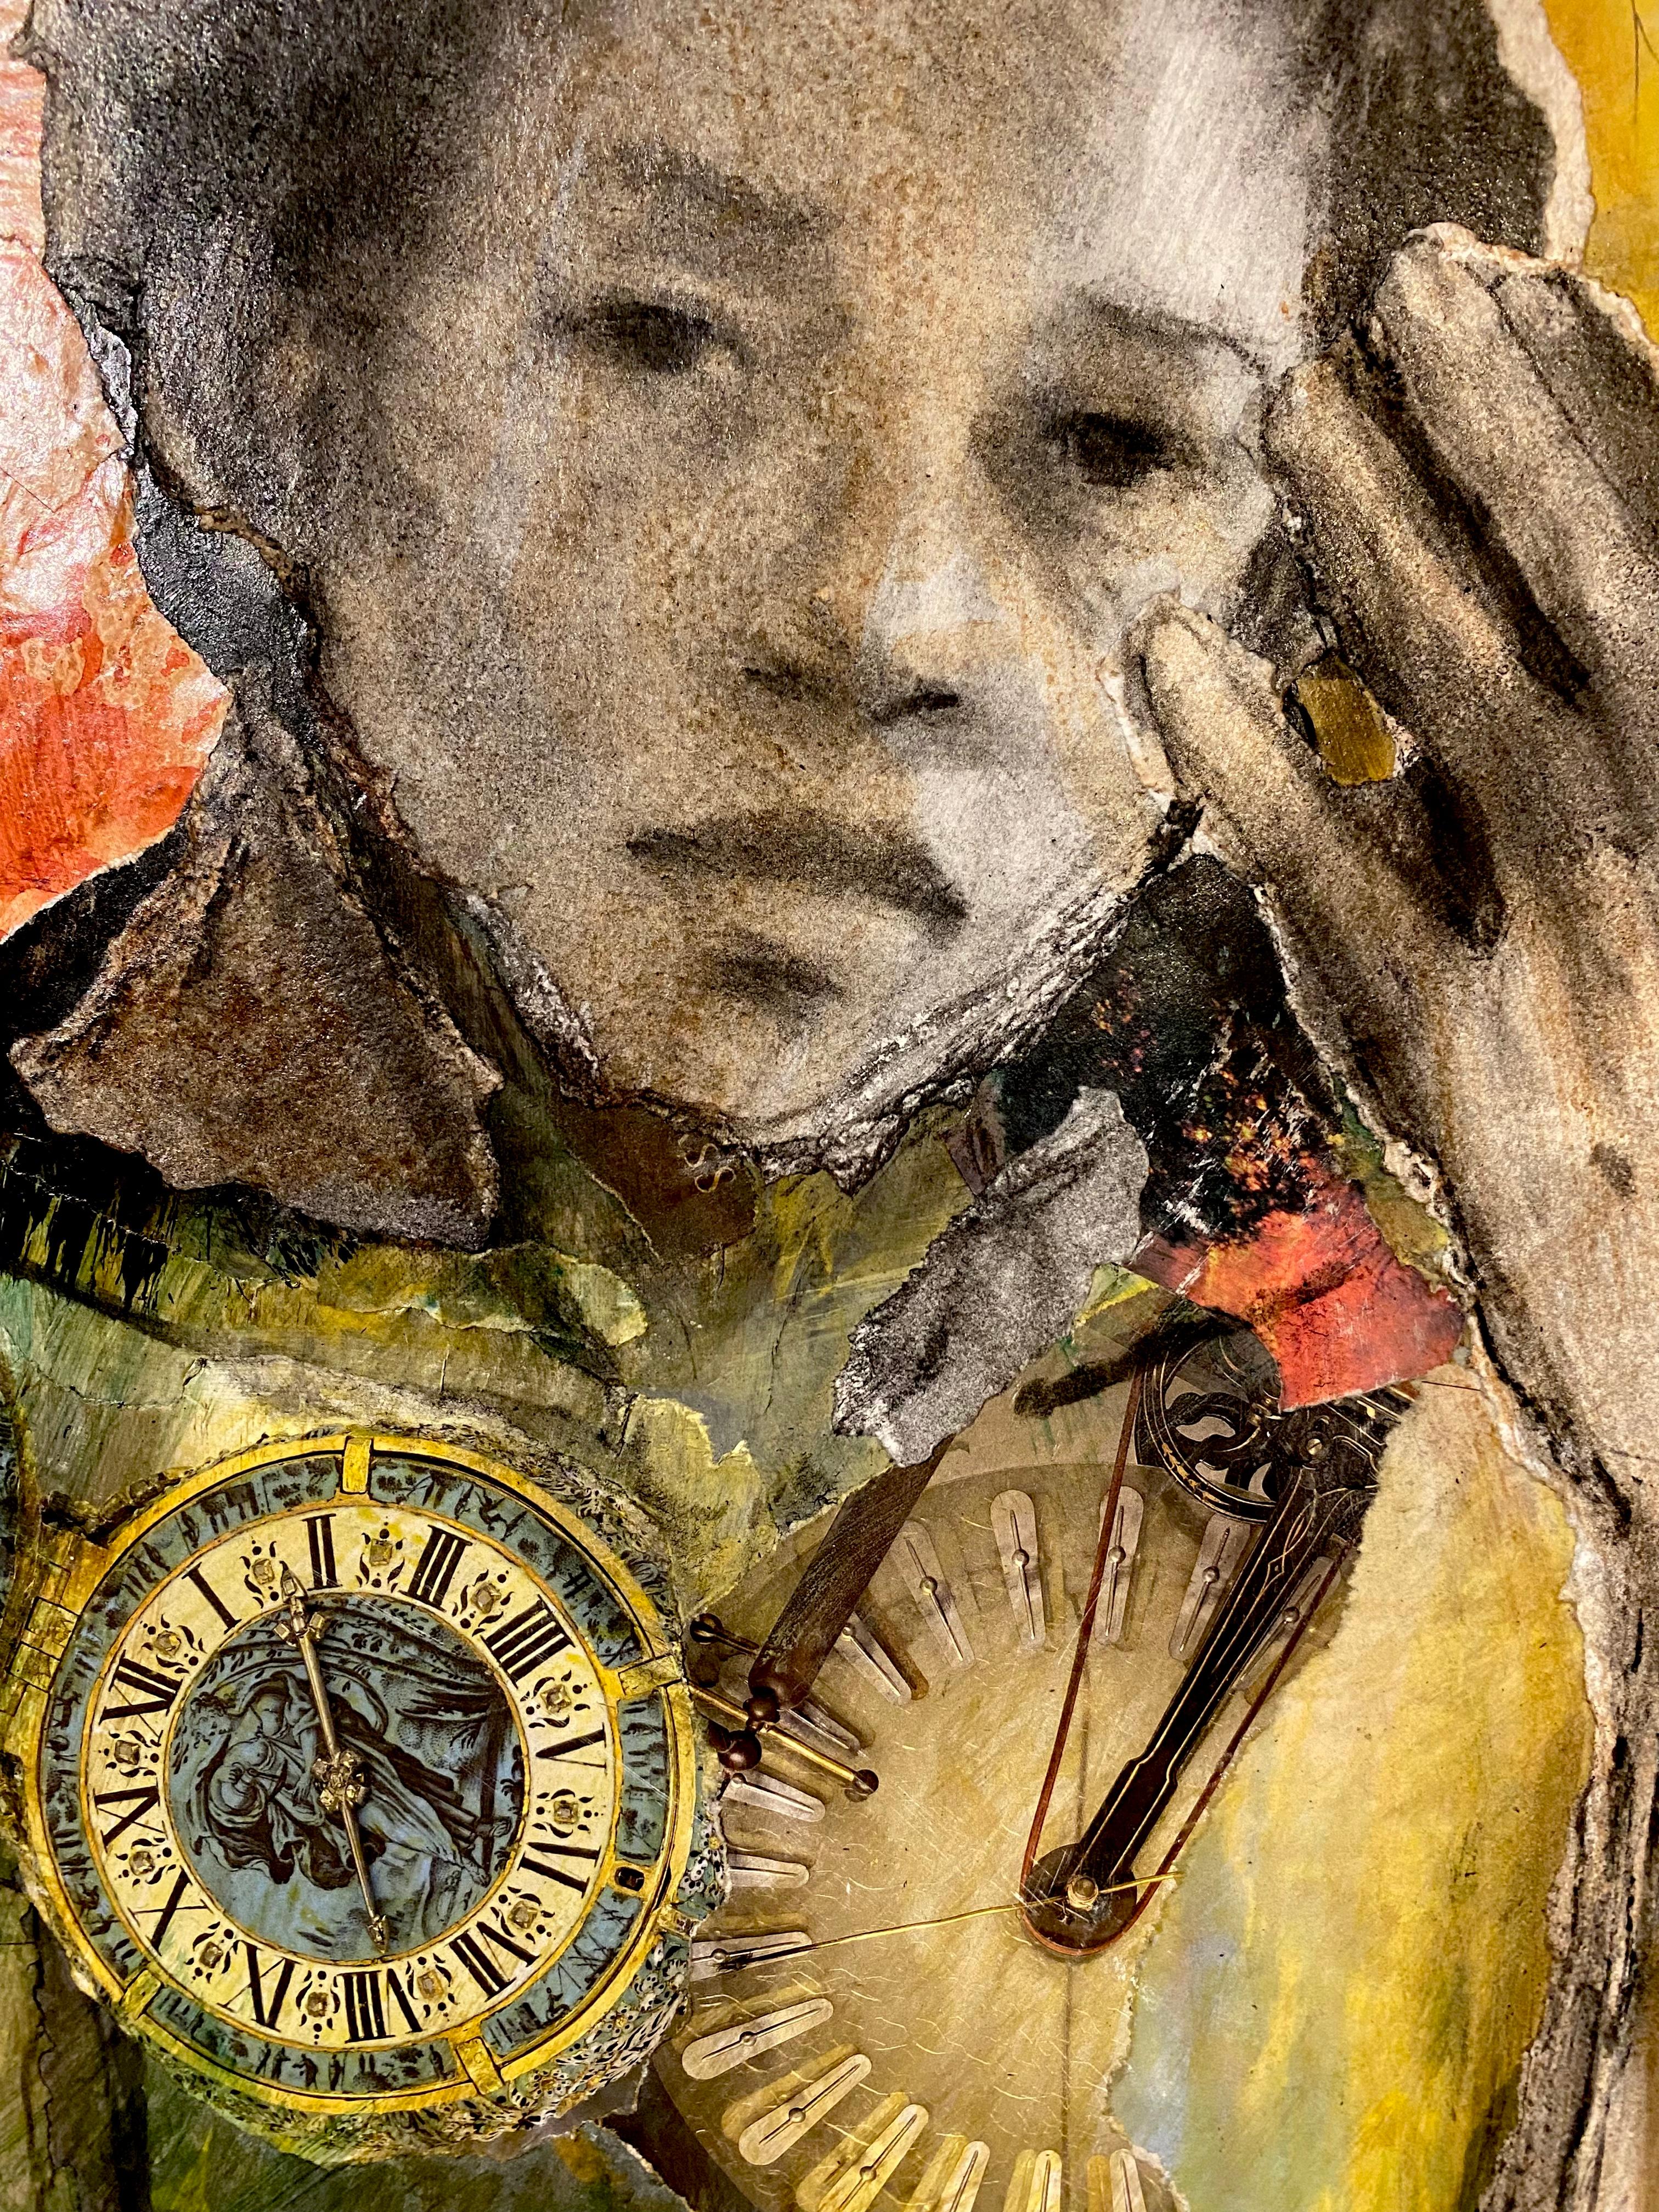 Continuum pregnancy collage female figure, ochre earth tones time clocks, hands - Art by Audrey Anastasi